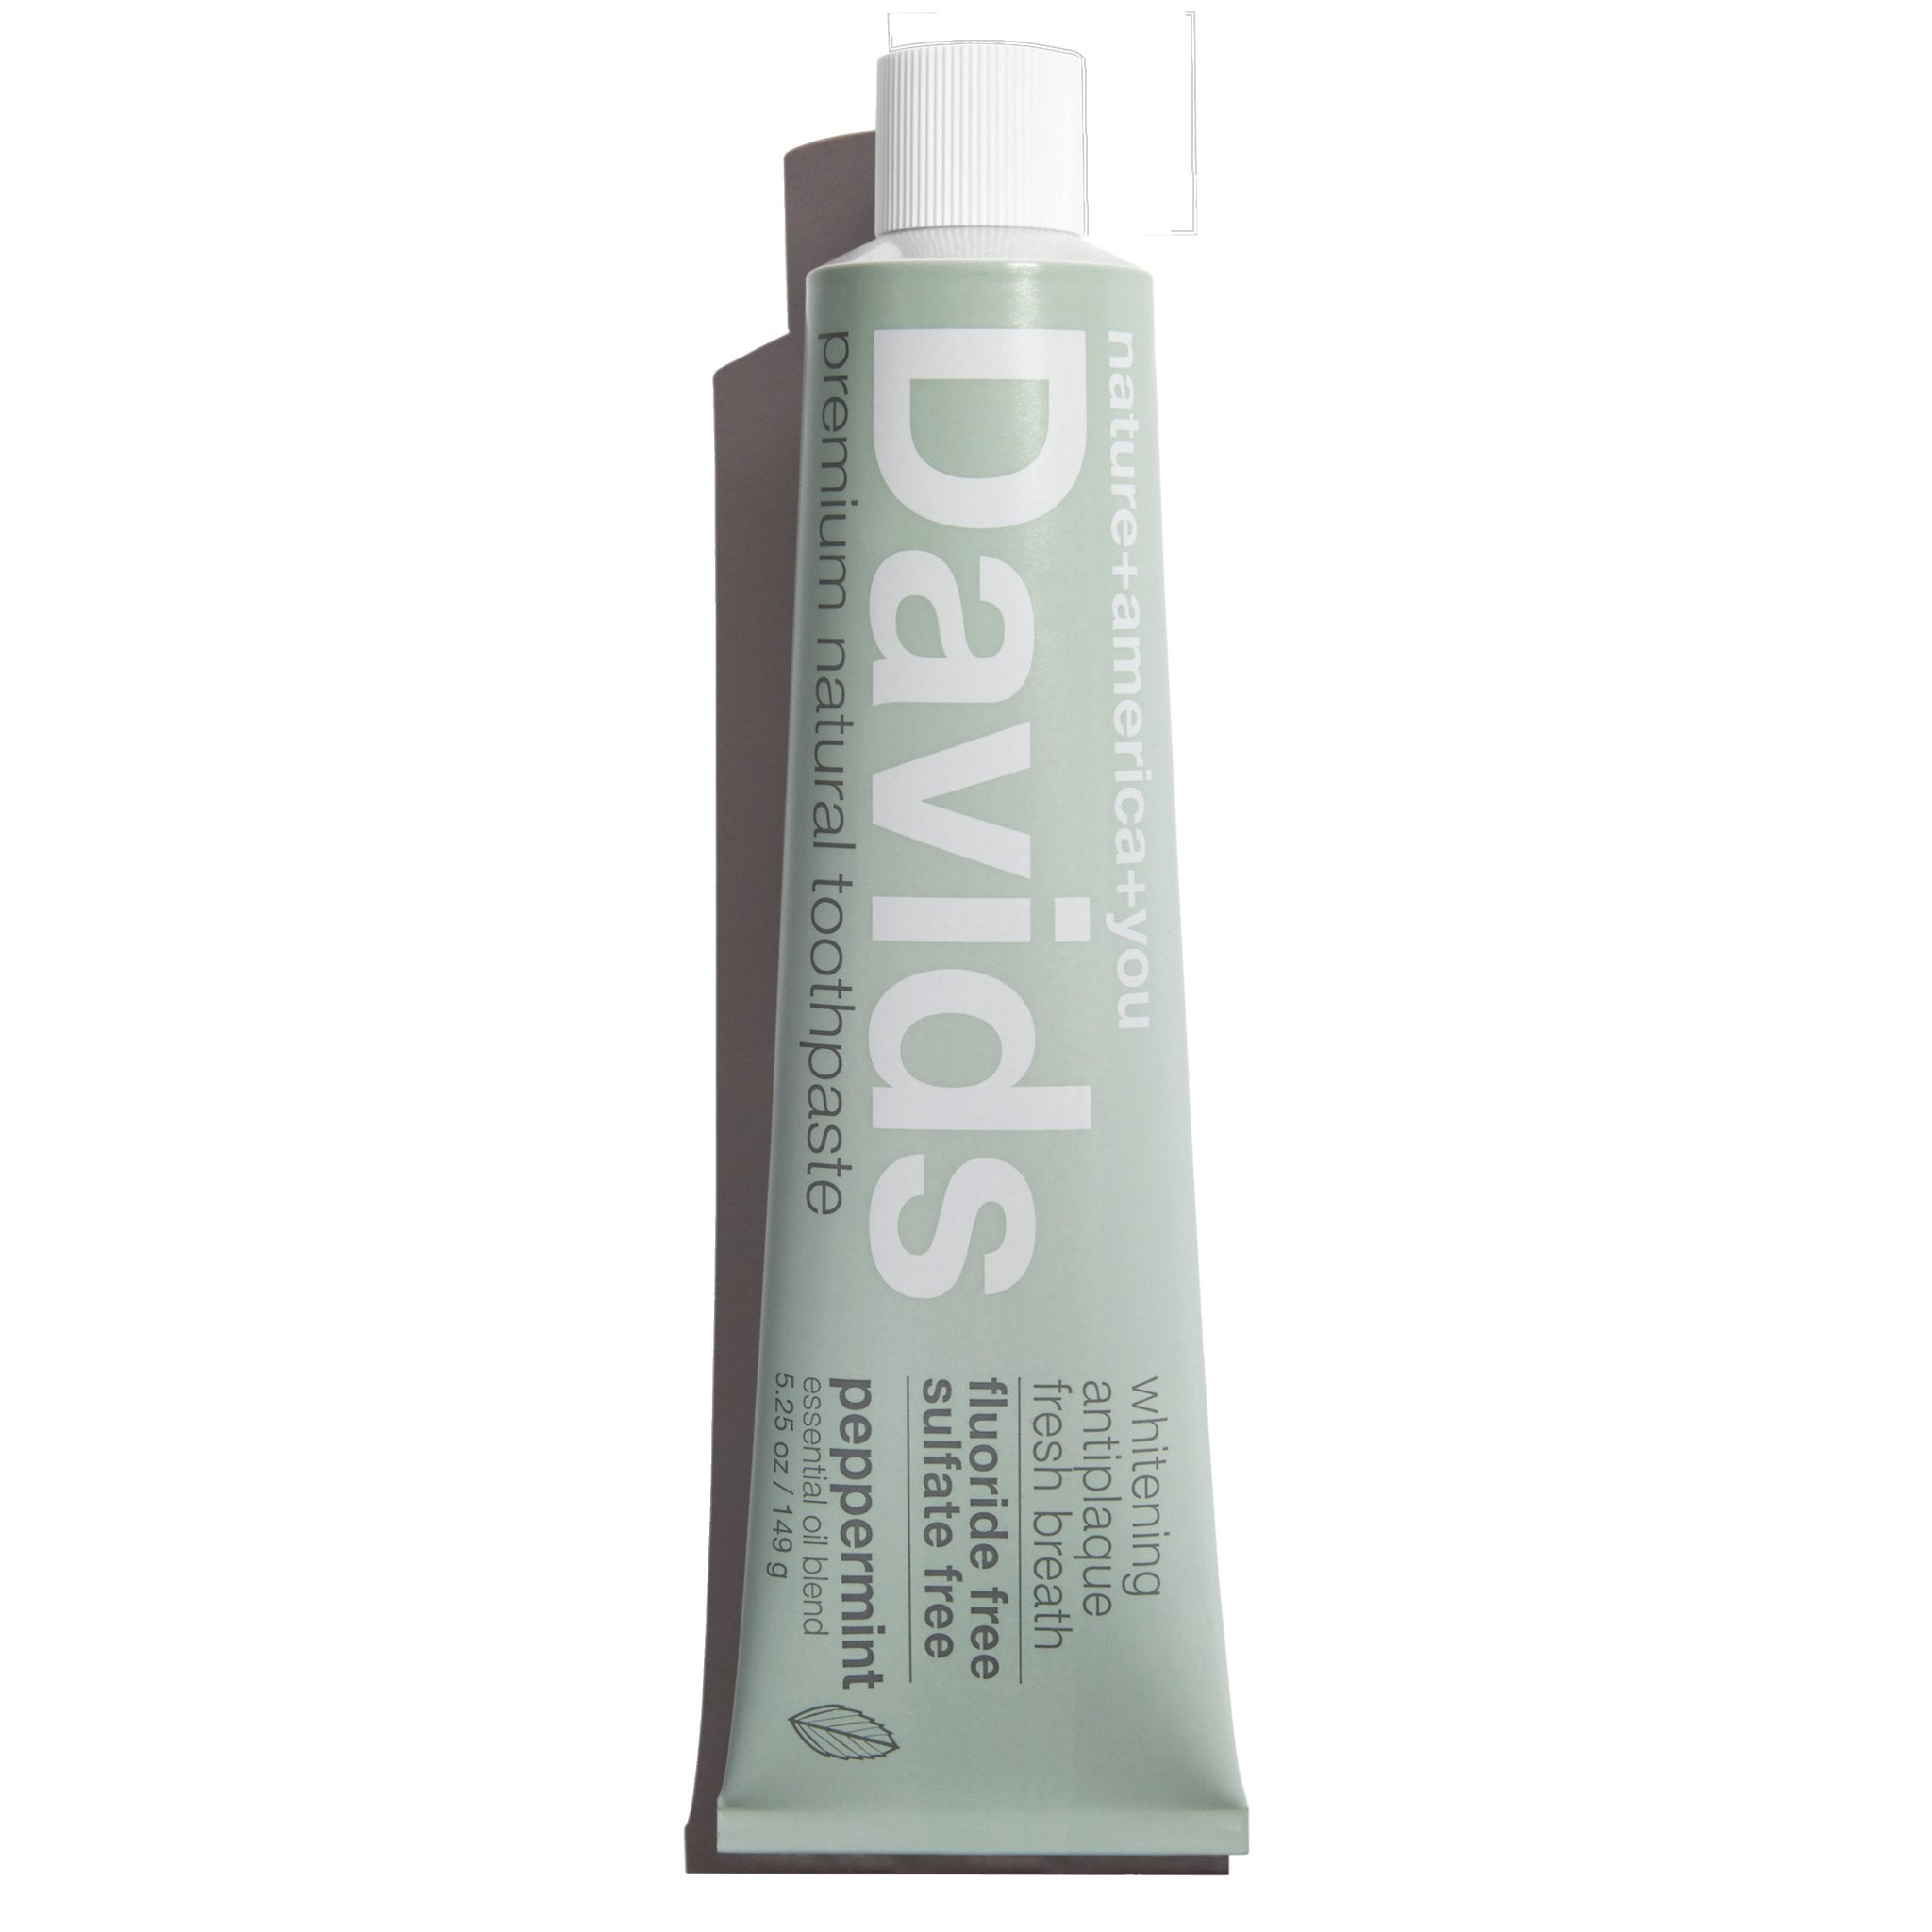 Toothpaste Tube: Davids - Marley's Monsters